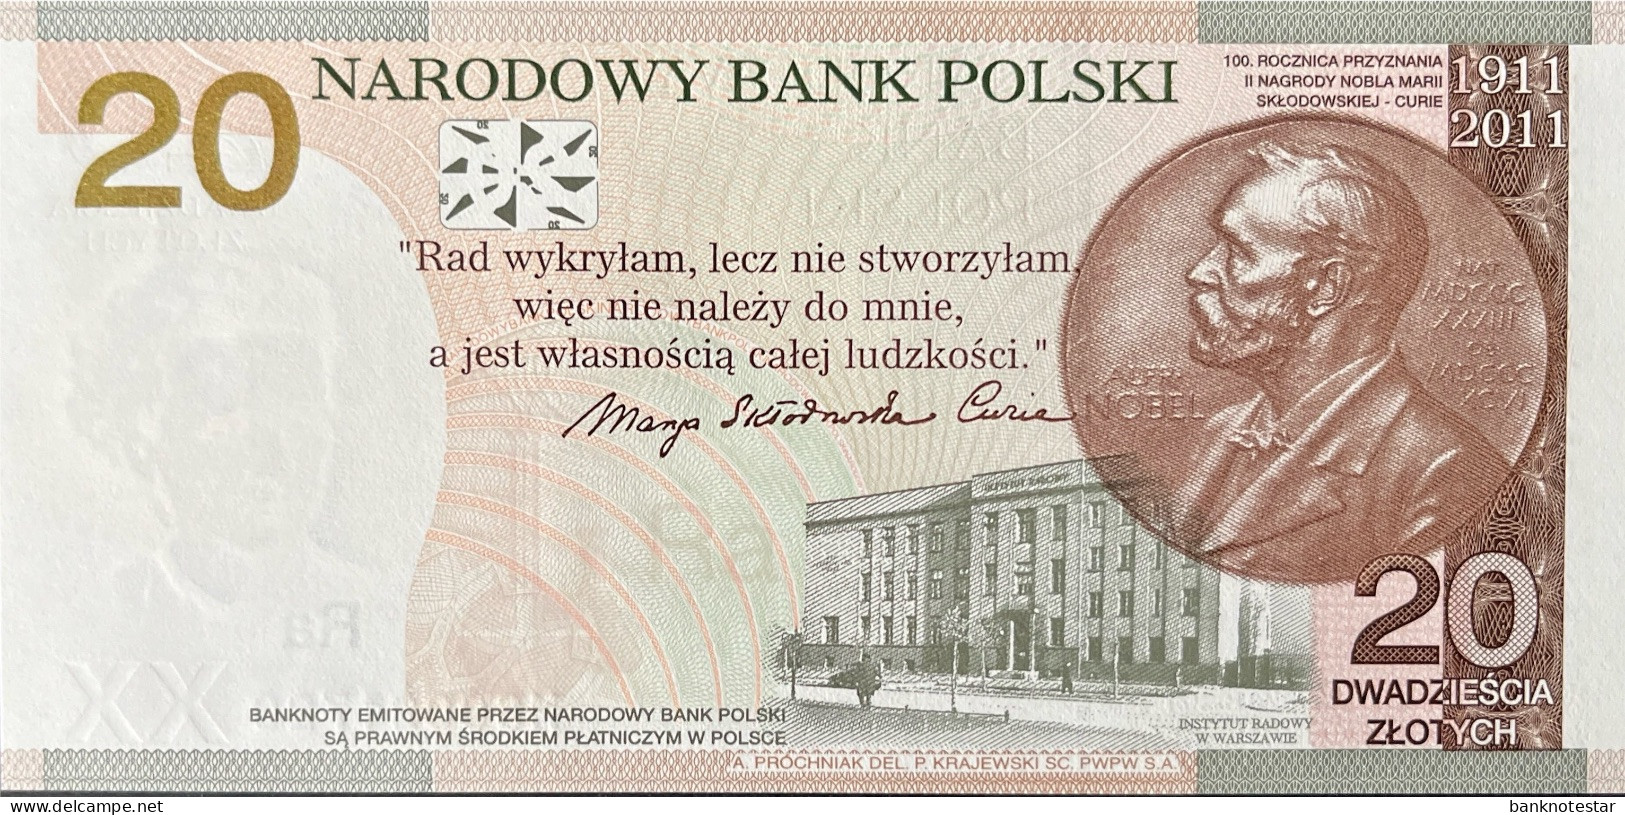 Poland 20 Zloty, P-A184 (20.4.2011) - UNC - Marie Curie Banknote - Pologne